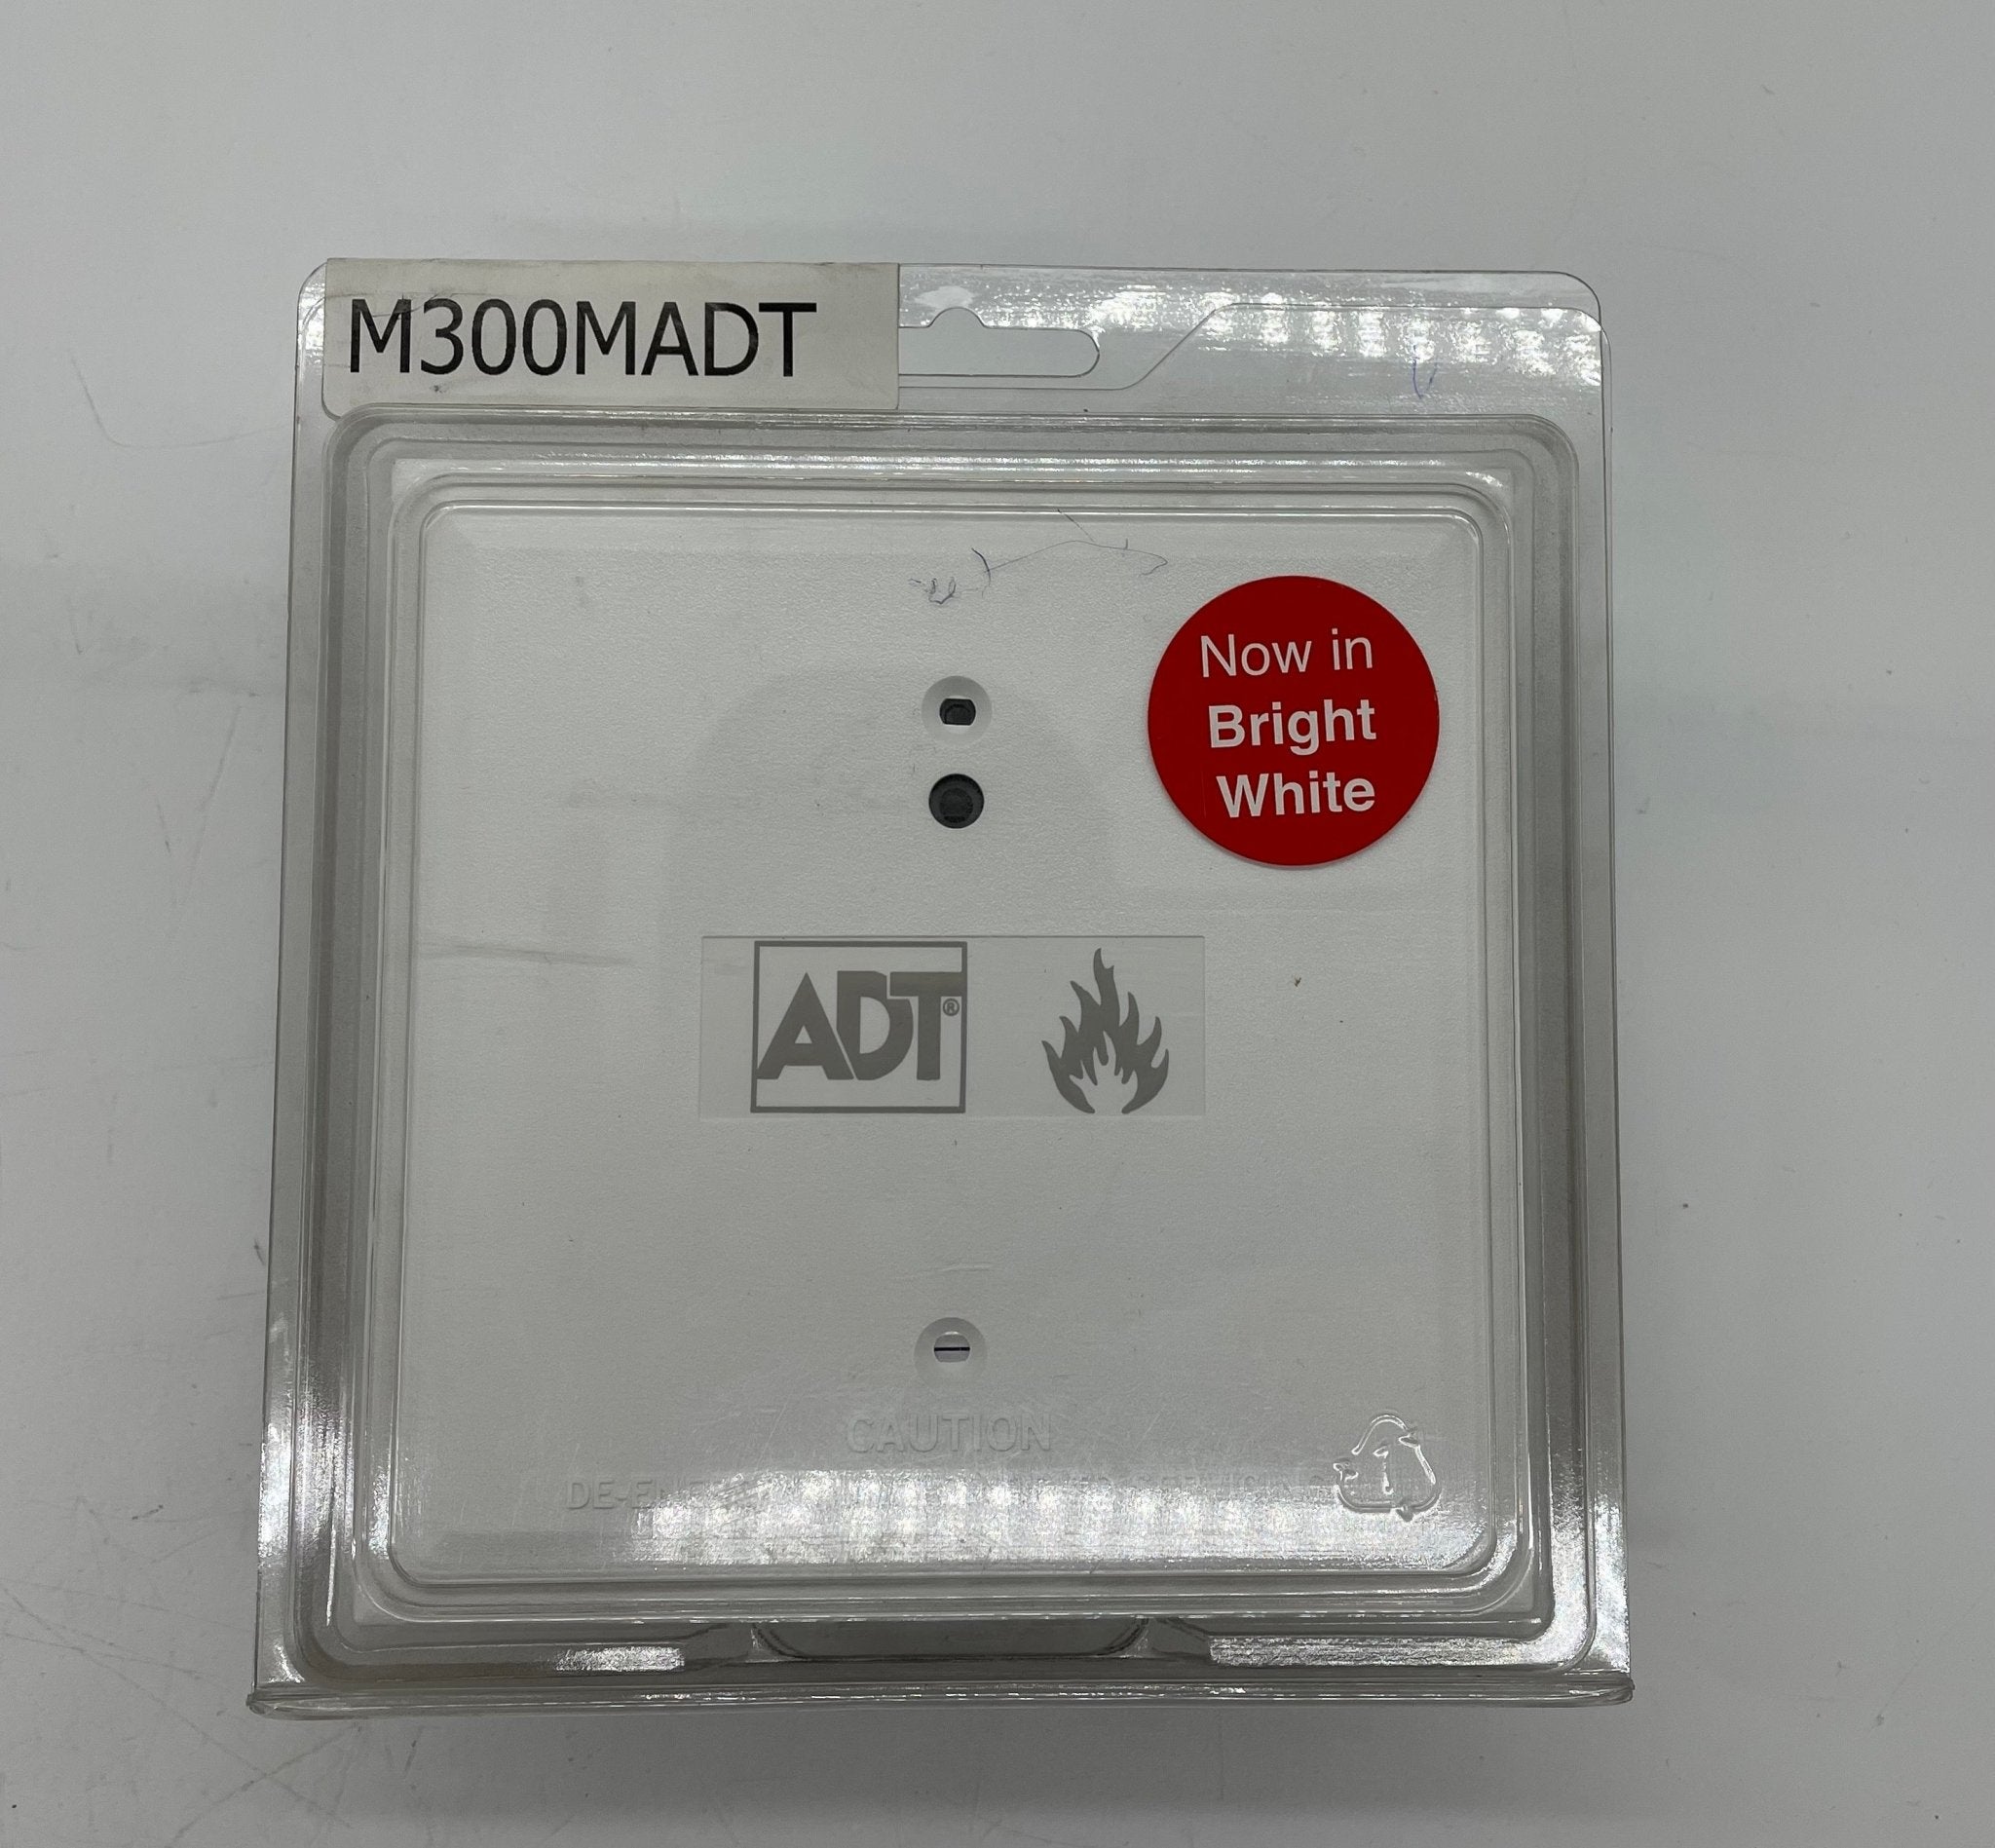 ADT M300MADT - The Fire Alarm Supplier